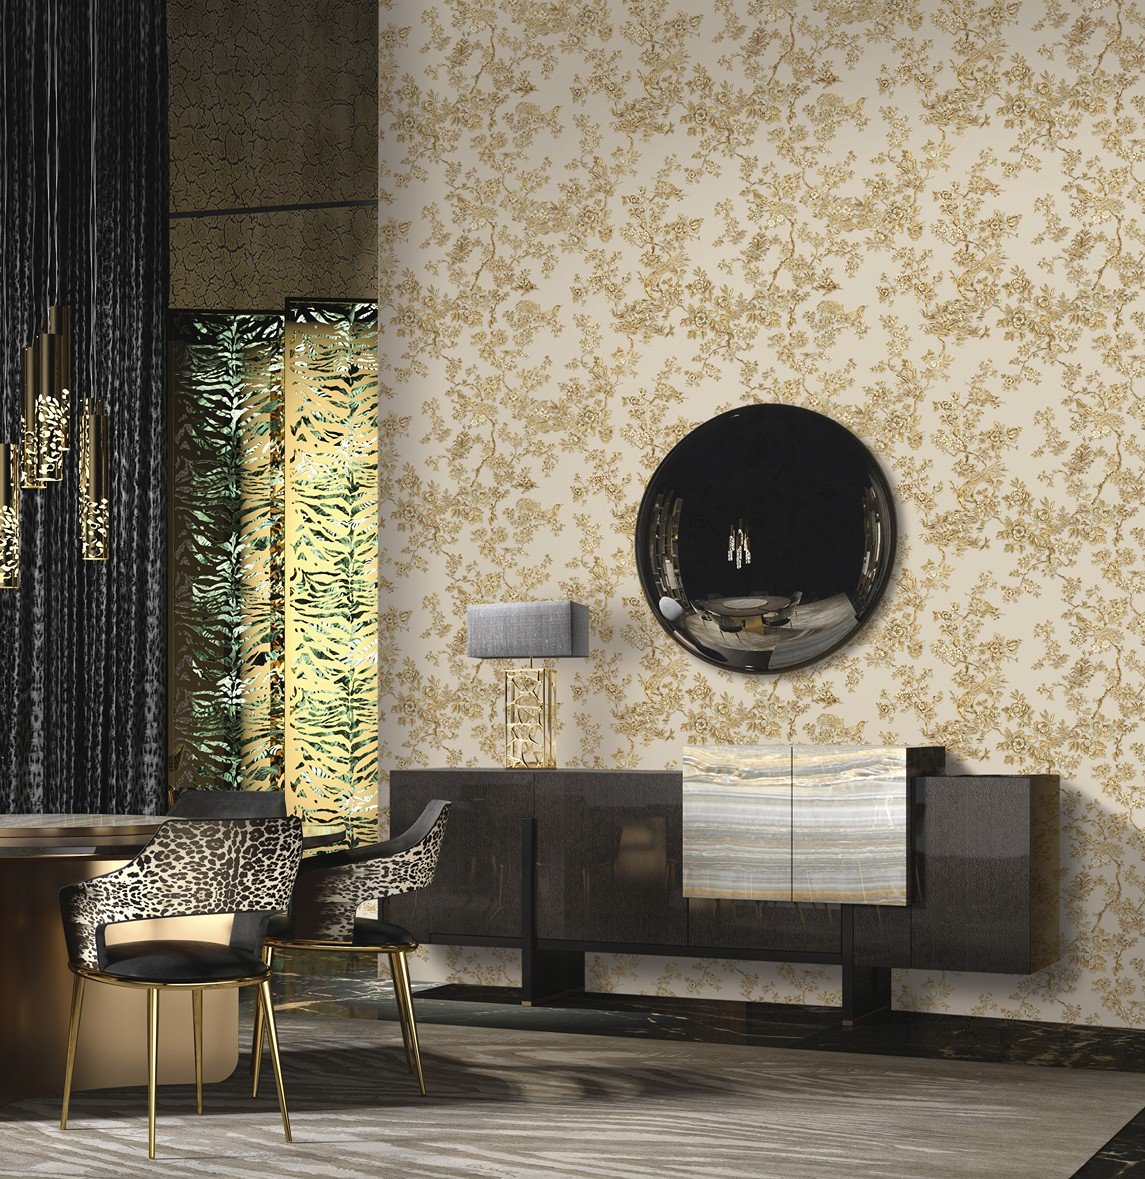 Authorized Dealer of RC18056 by Roberto Cavalli Wallpaper at Designer  Wallcoverings and Fabrics, Your online resource since 2007